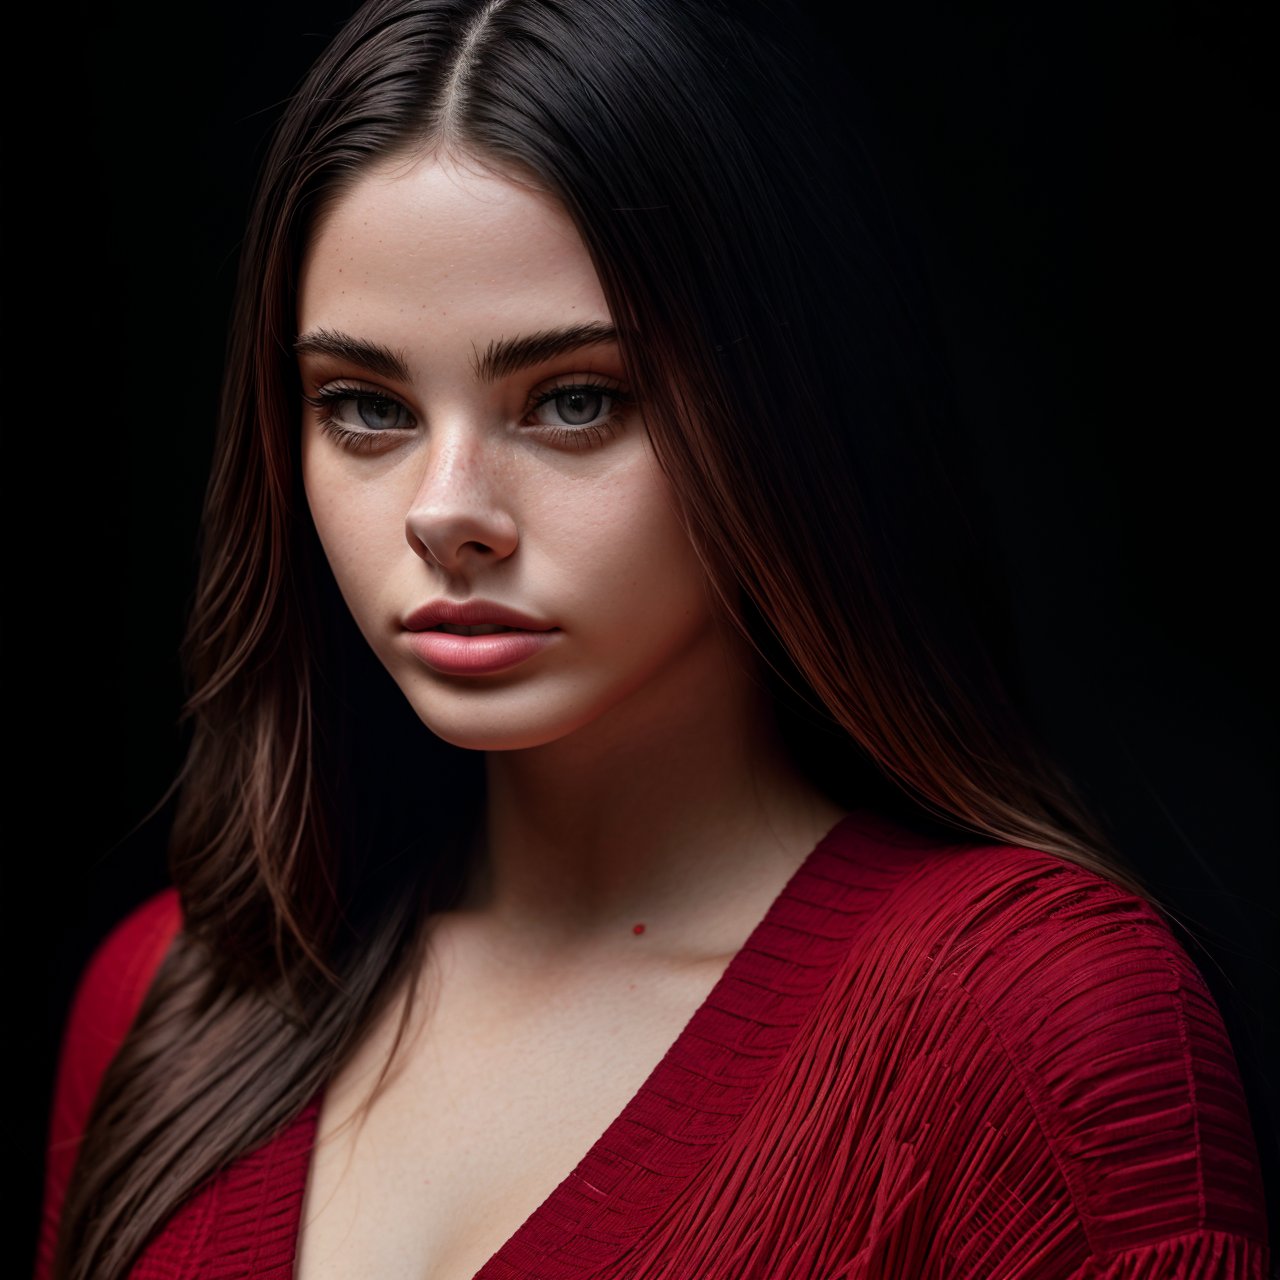 (masterpiece:1.3), wallpaper looking back, full body portrait of self-assurance (AIDA_LoRA_MeW2023:1.06) <lora:AIDA_LoRA_MeW2023:0.96> in (simple red shirt:1.1), [stunning woman], pretty face, parted lips, cinematic, dramatic, insane level of details, intricate pattern, kkw-ph1, (colorful:1.1), (studio photo:1.1), (simple black background:1.1)